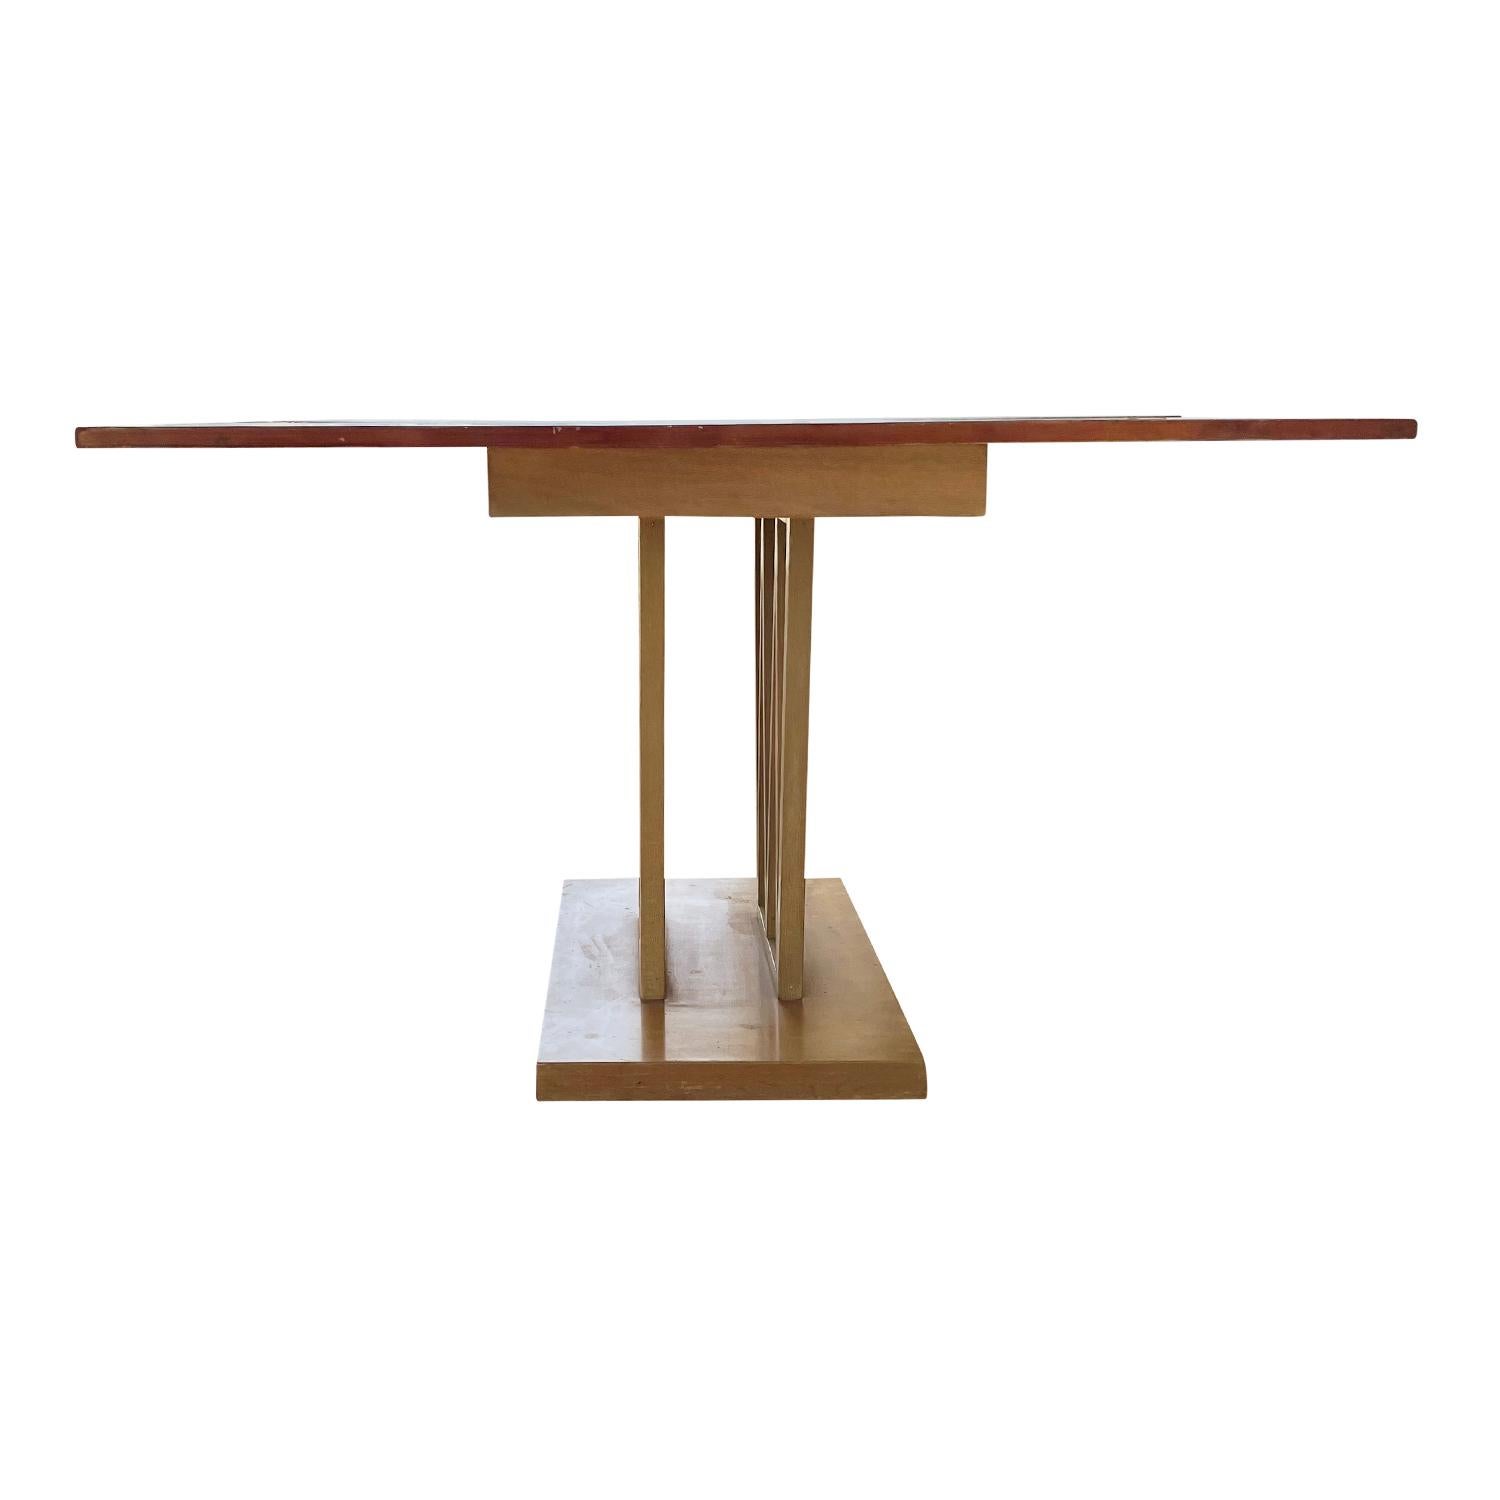 20th Century Danish Vintage Sculptural Folding Walnut Dining, End Table For Sale 3